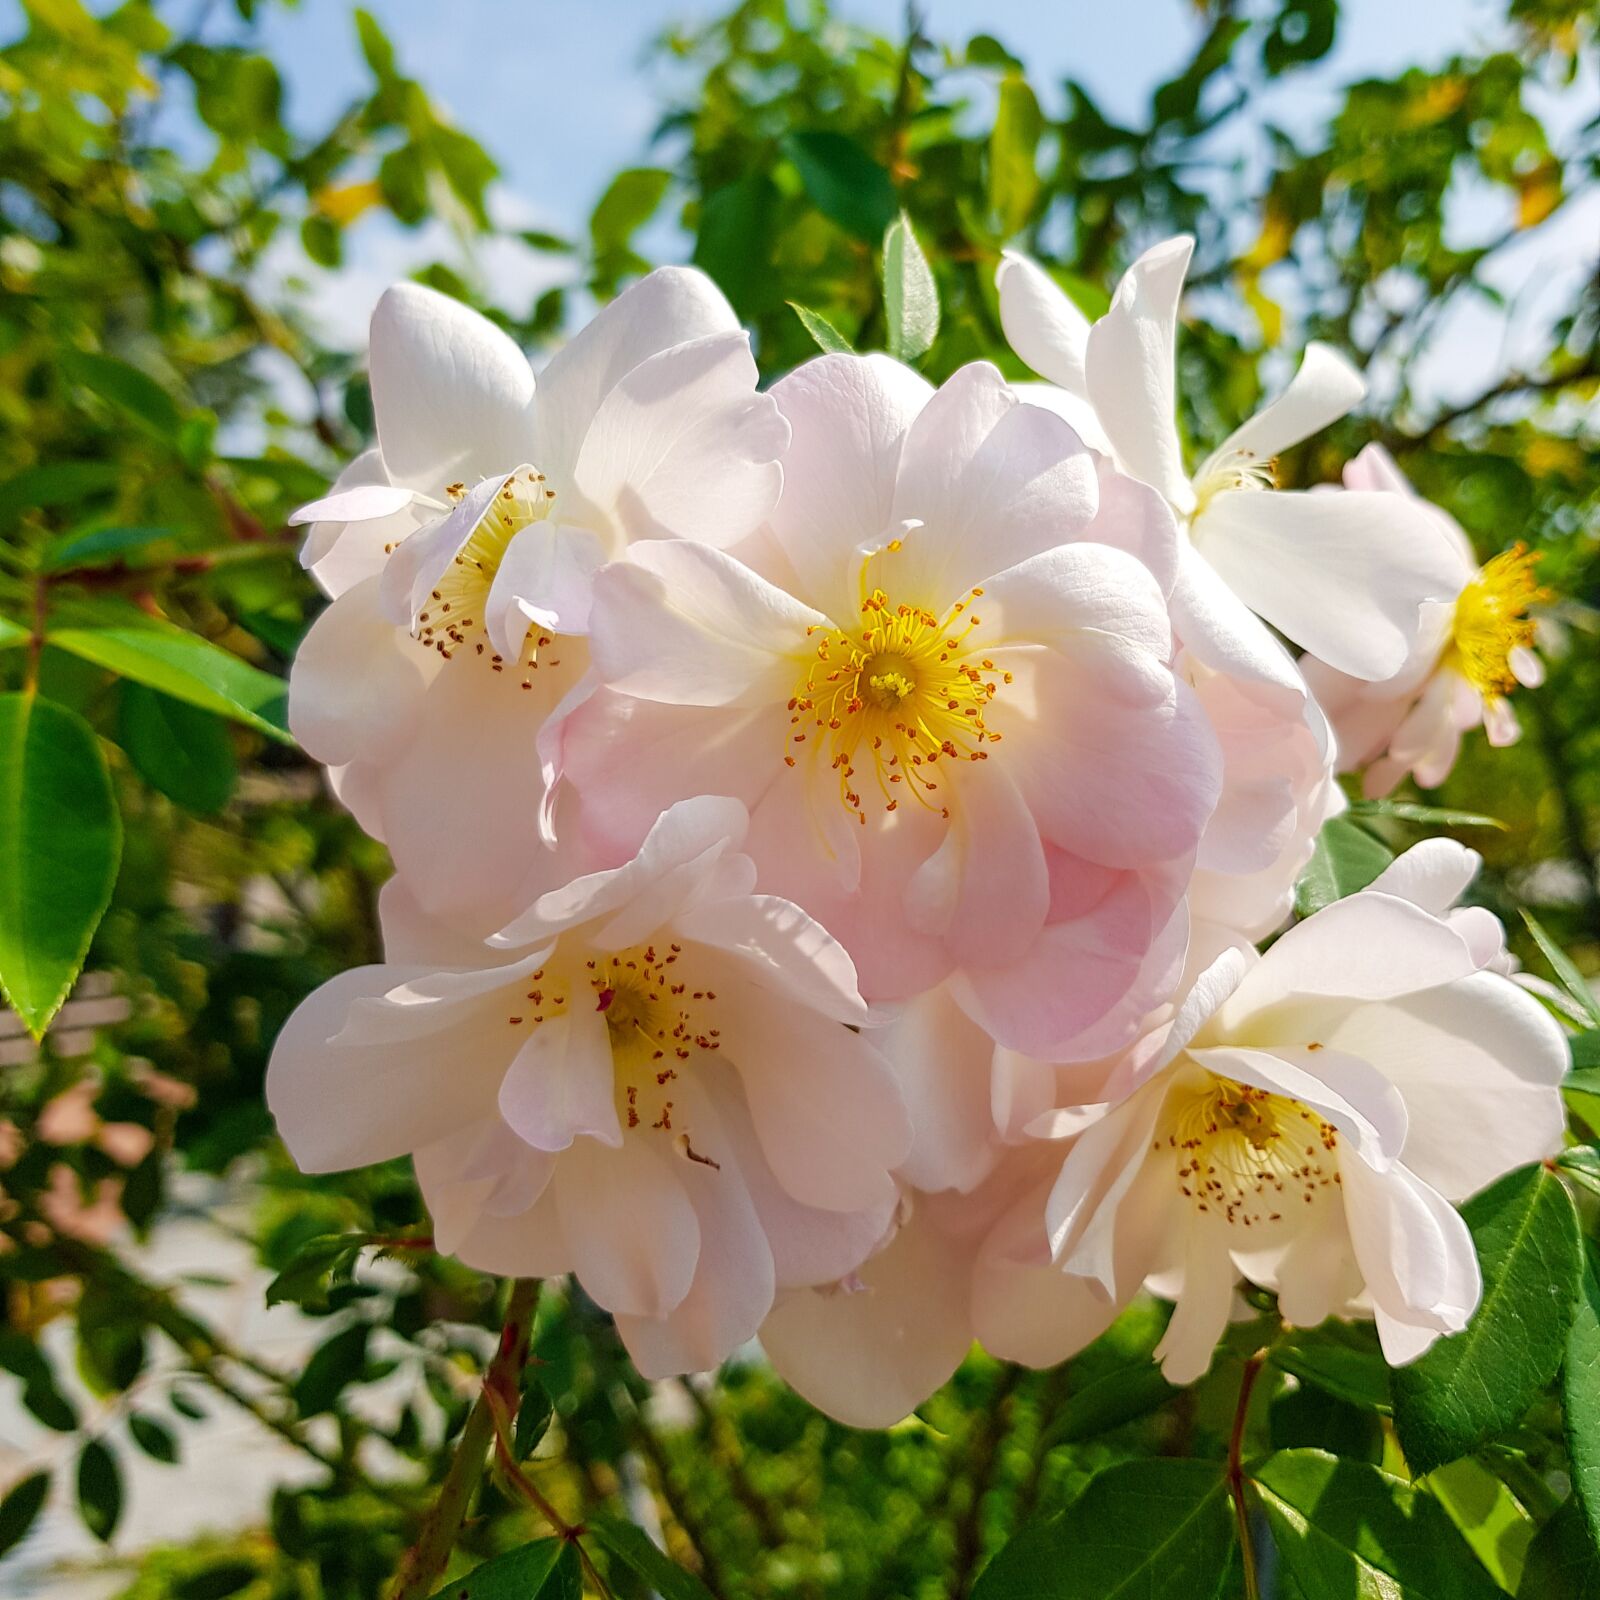 Samsung SM-G955F + Samsung Galaxy S8+ Rear Camera sample photo. Flowers, white flowers, nature photography